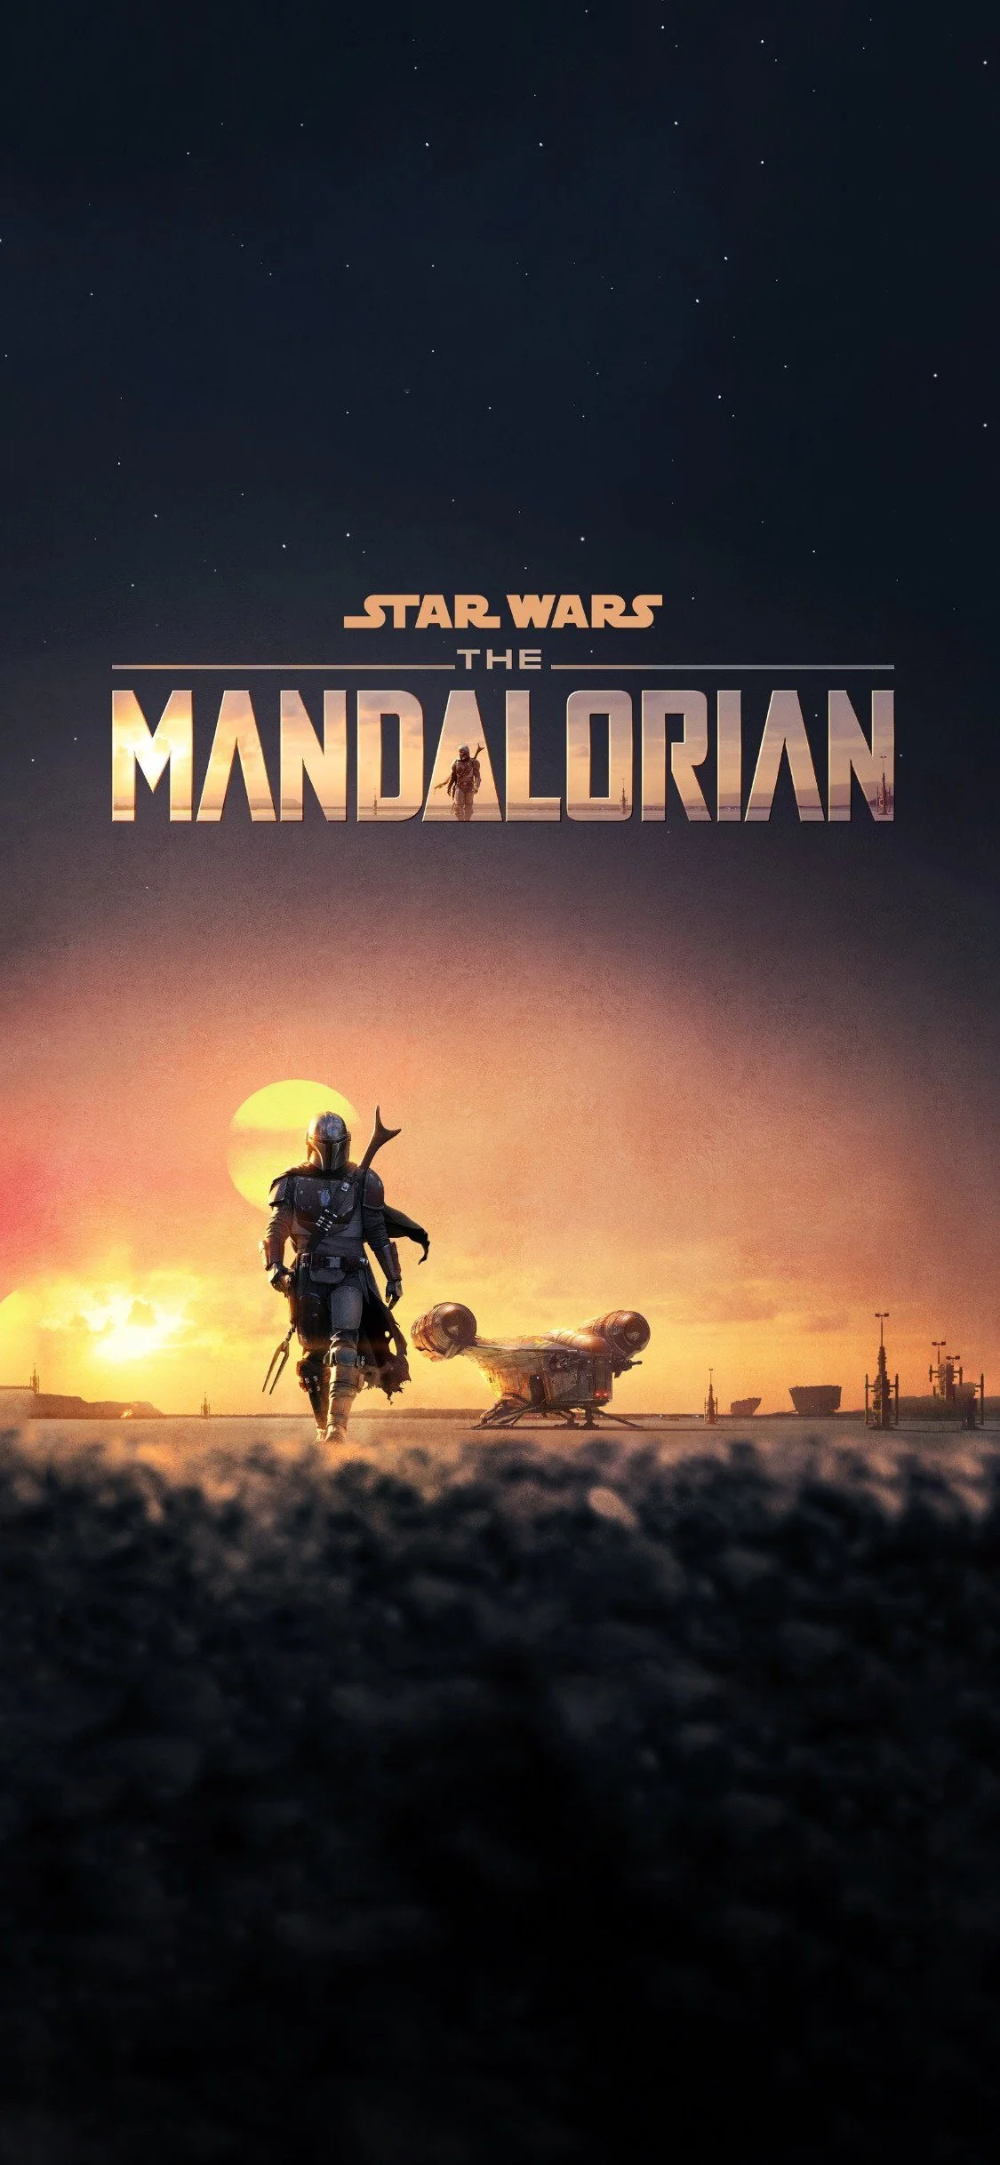 The Mandalorian (with and without the title). iPhone X Wallpaper Craft. Star wars wallpaper, Mandalorian, Star wars geek